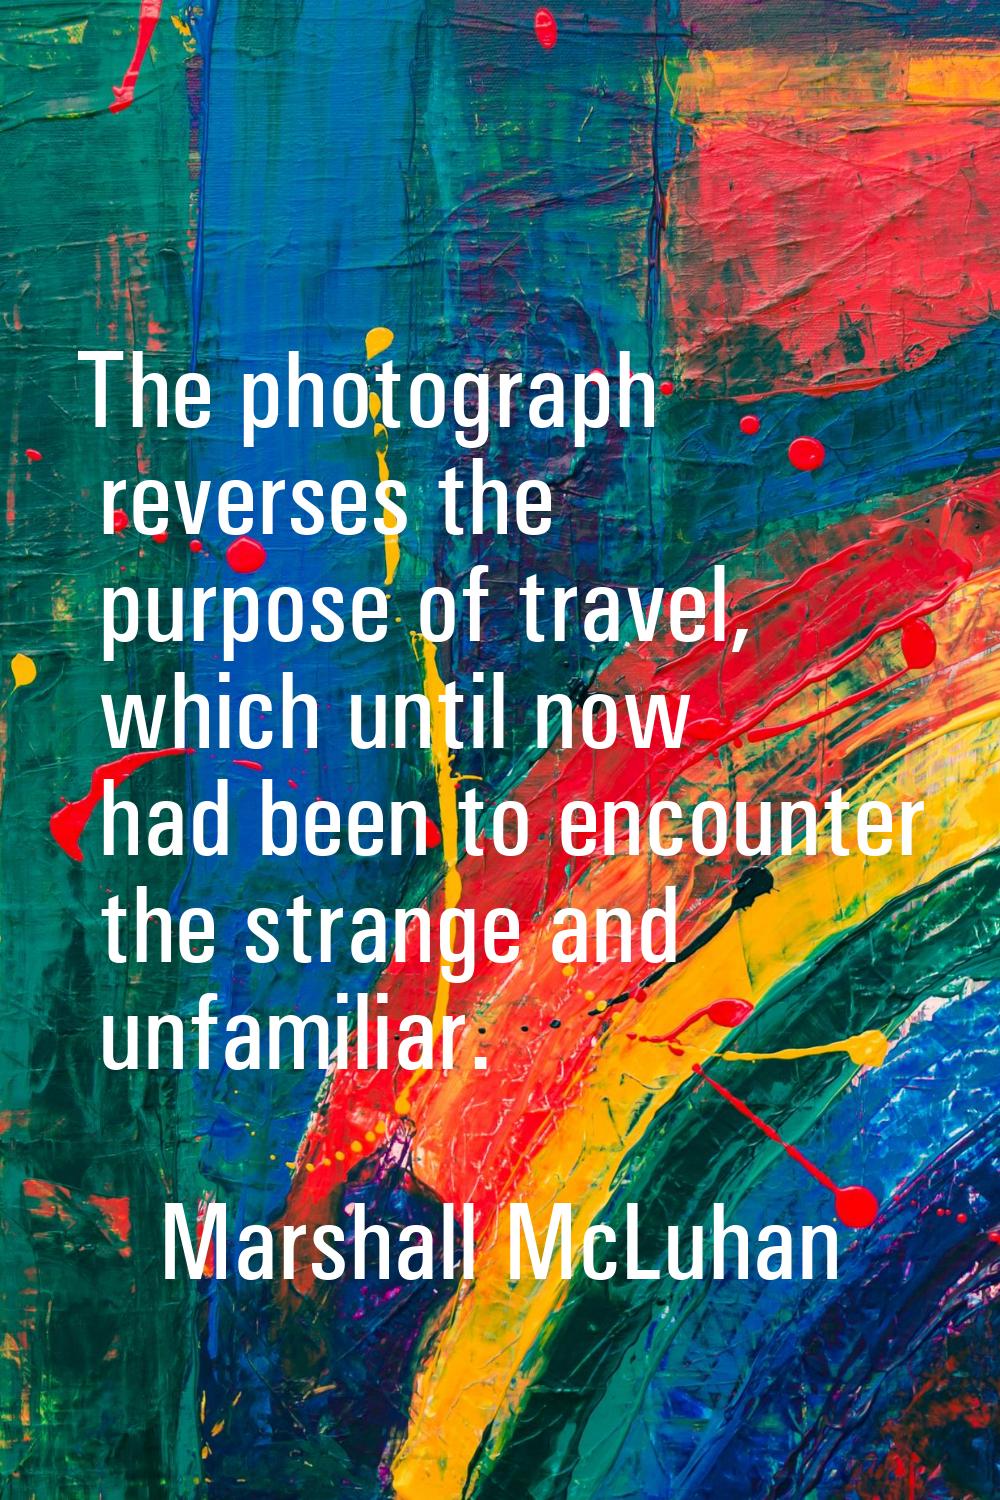 The photograph reverses the purpose of travel, which until now had been to encounter the strange an